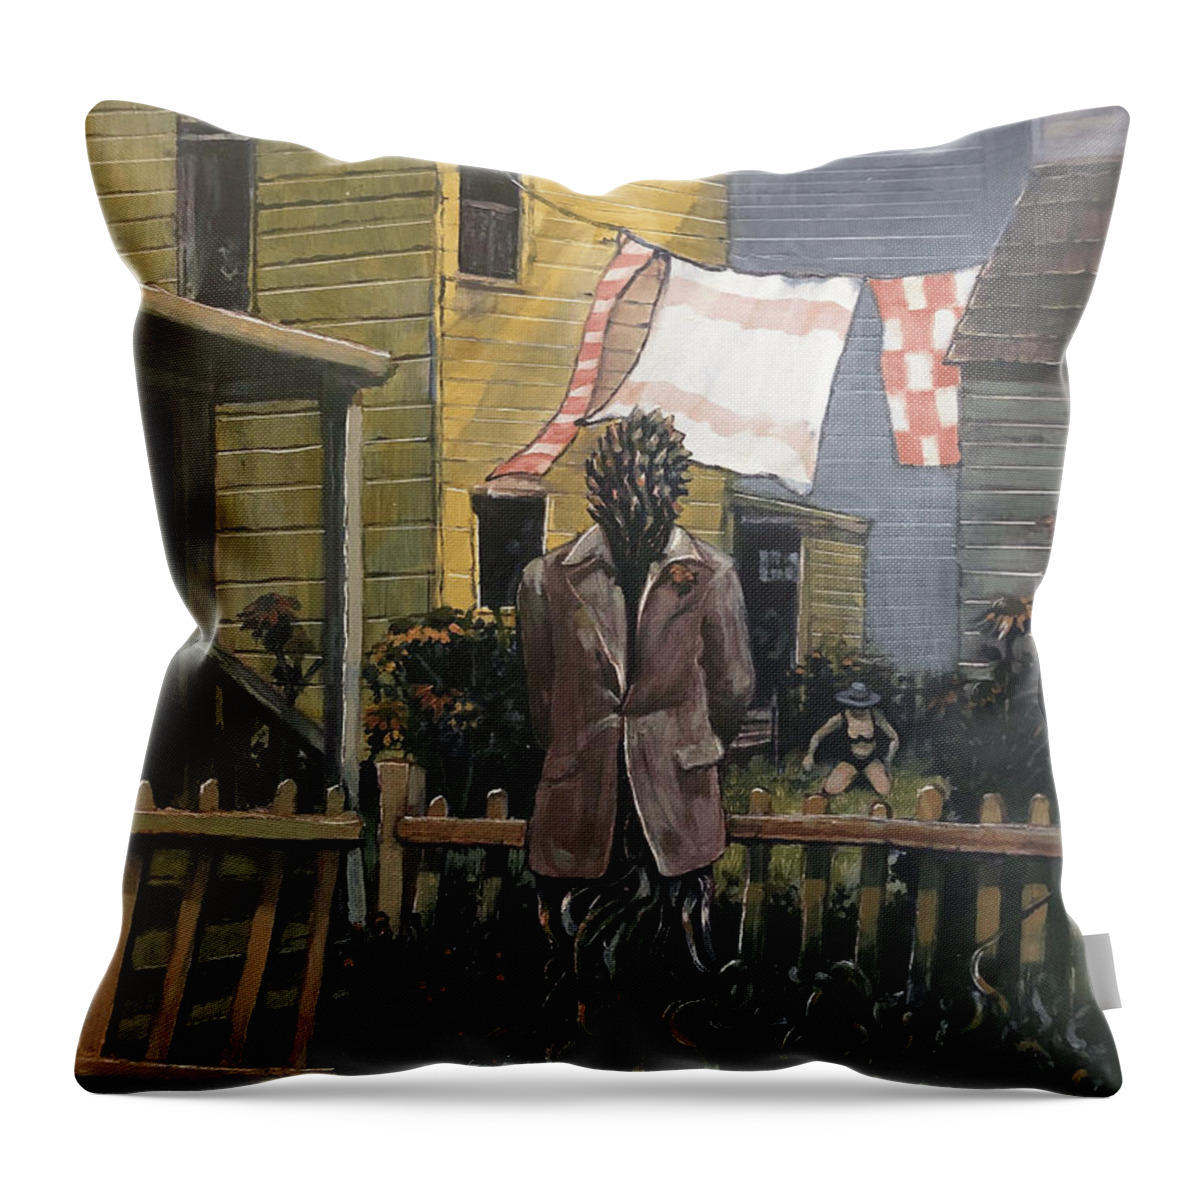 Garden Throw Pillow featuring the painting Mr Pseudoacacia's Neighbor by William Stoneham